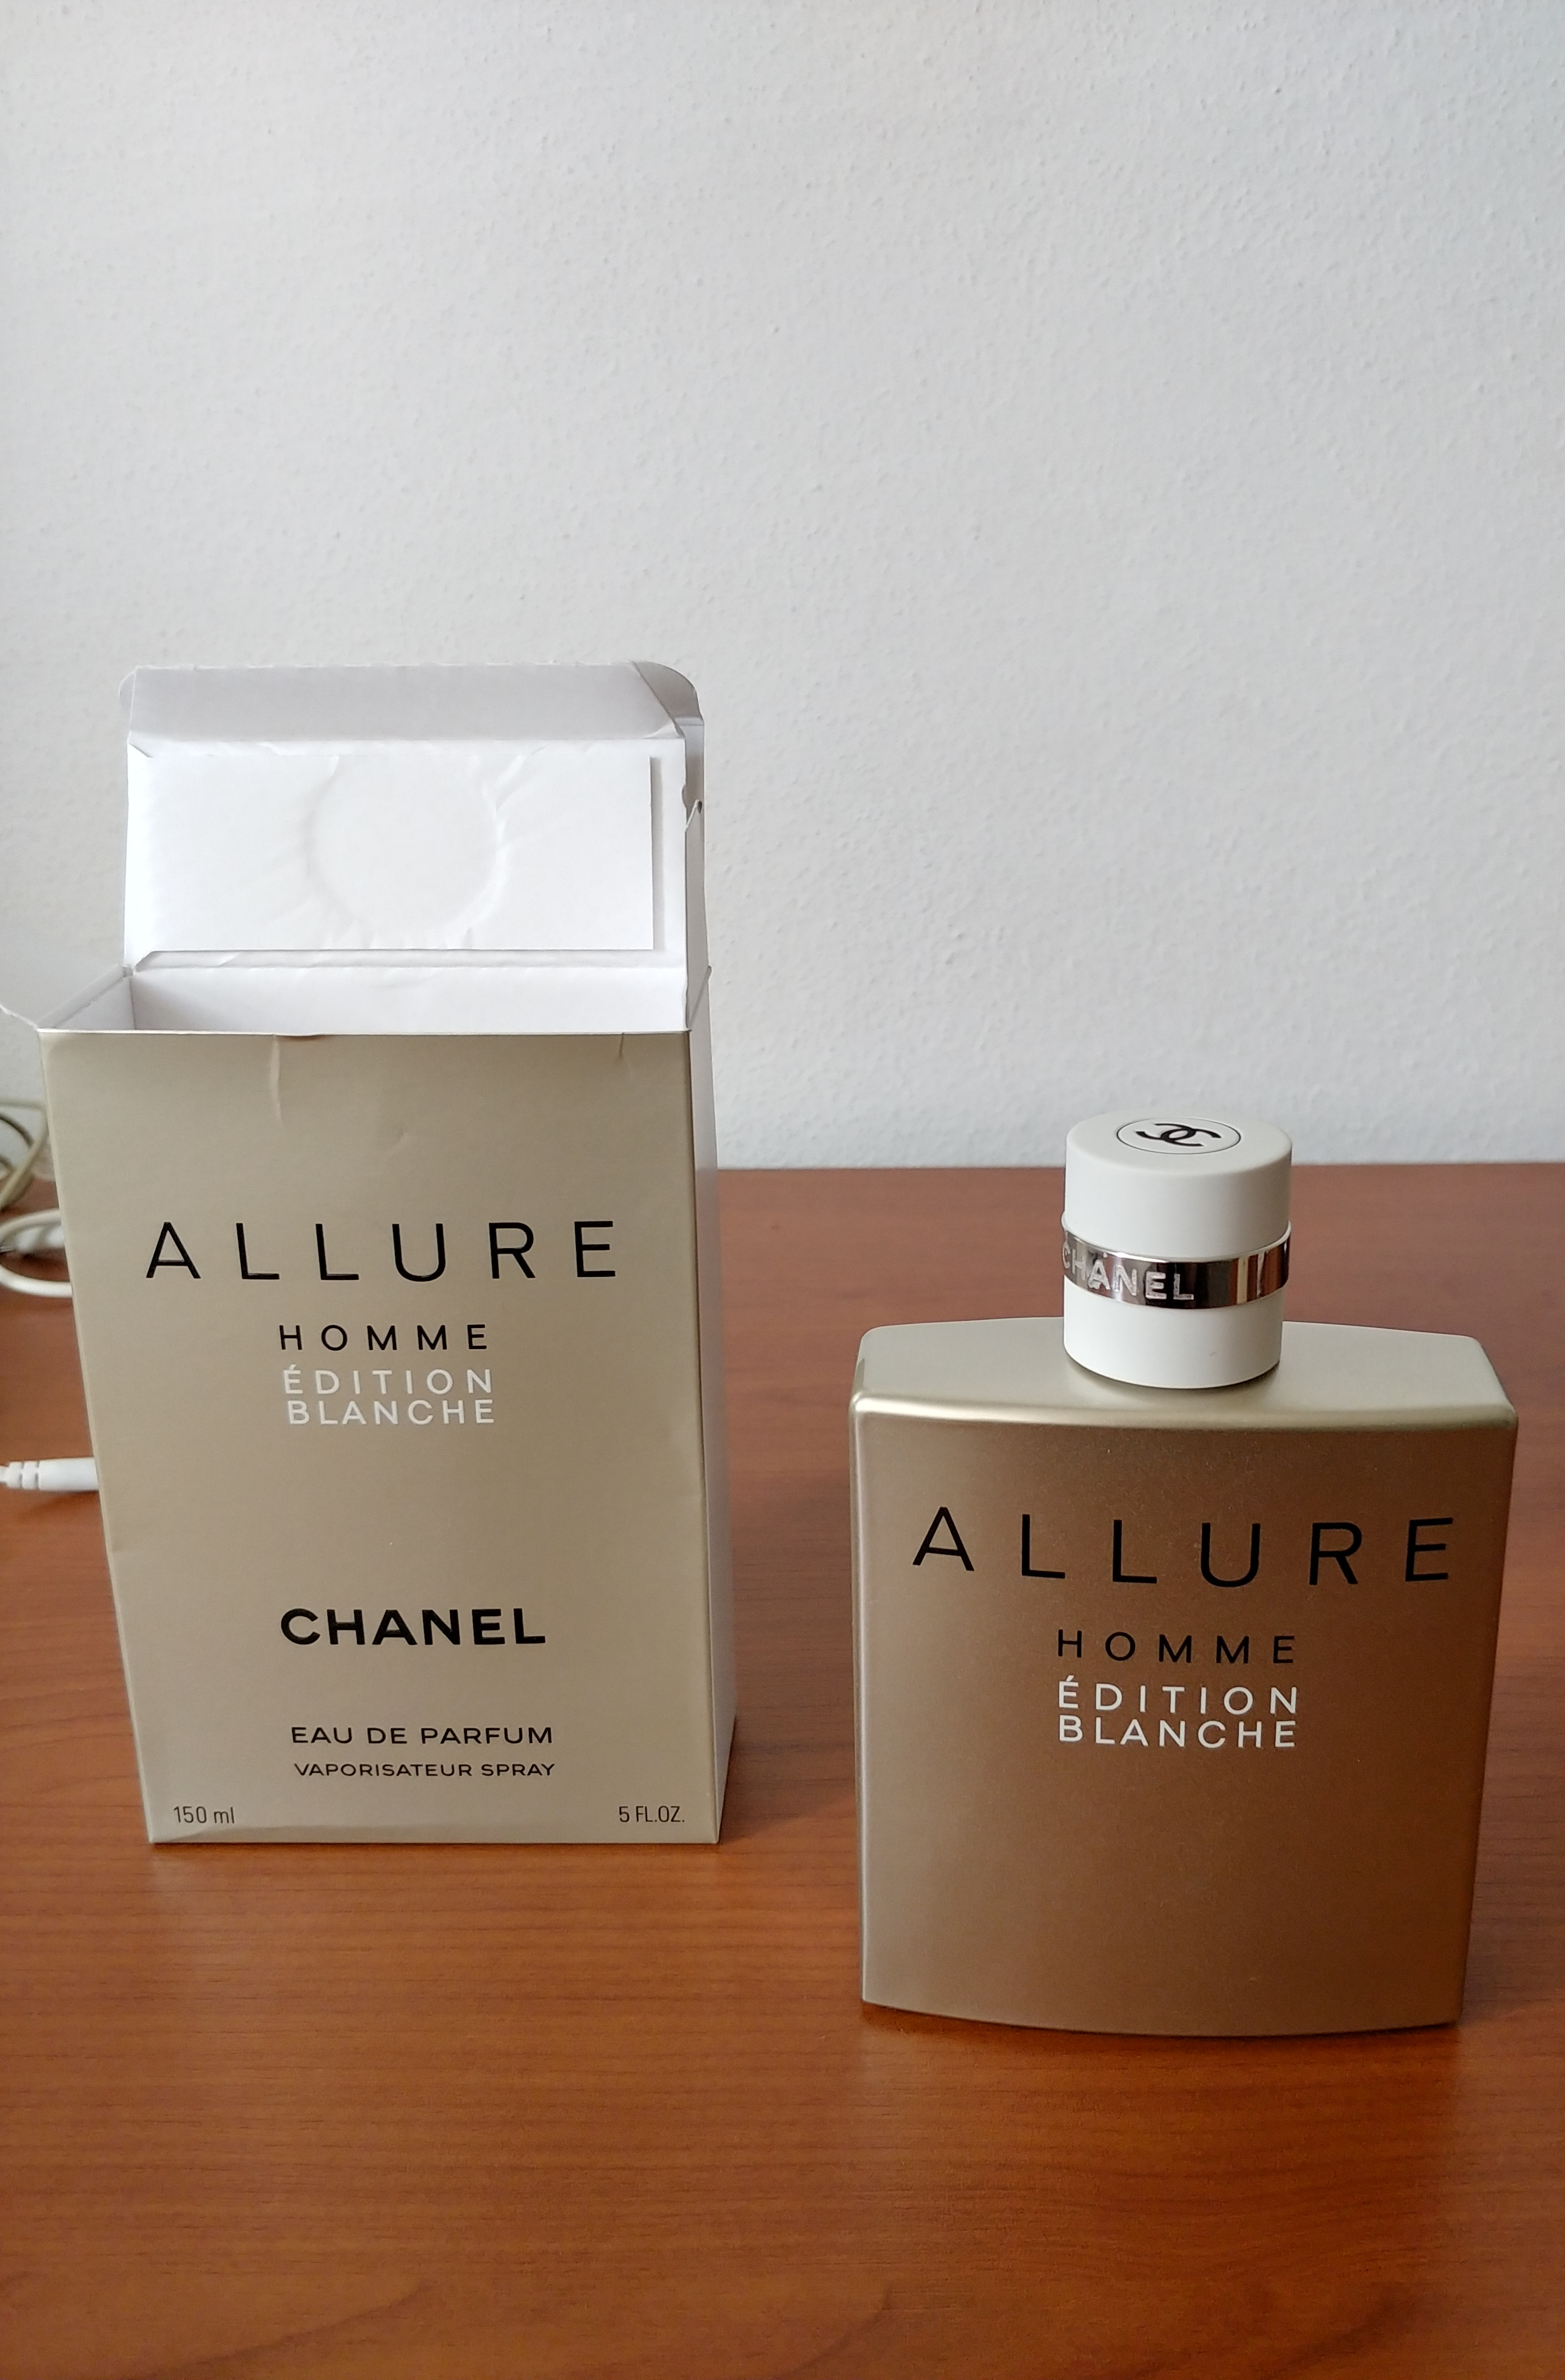 Alluring pour homme. Шанель Аллюр эдишн Бланш. Chanel Allure Edition Blanche. Chanel Allure homme Edition Blanche. Chanel Allure homme Sport Edition Blanche.